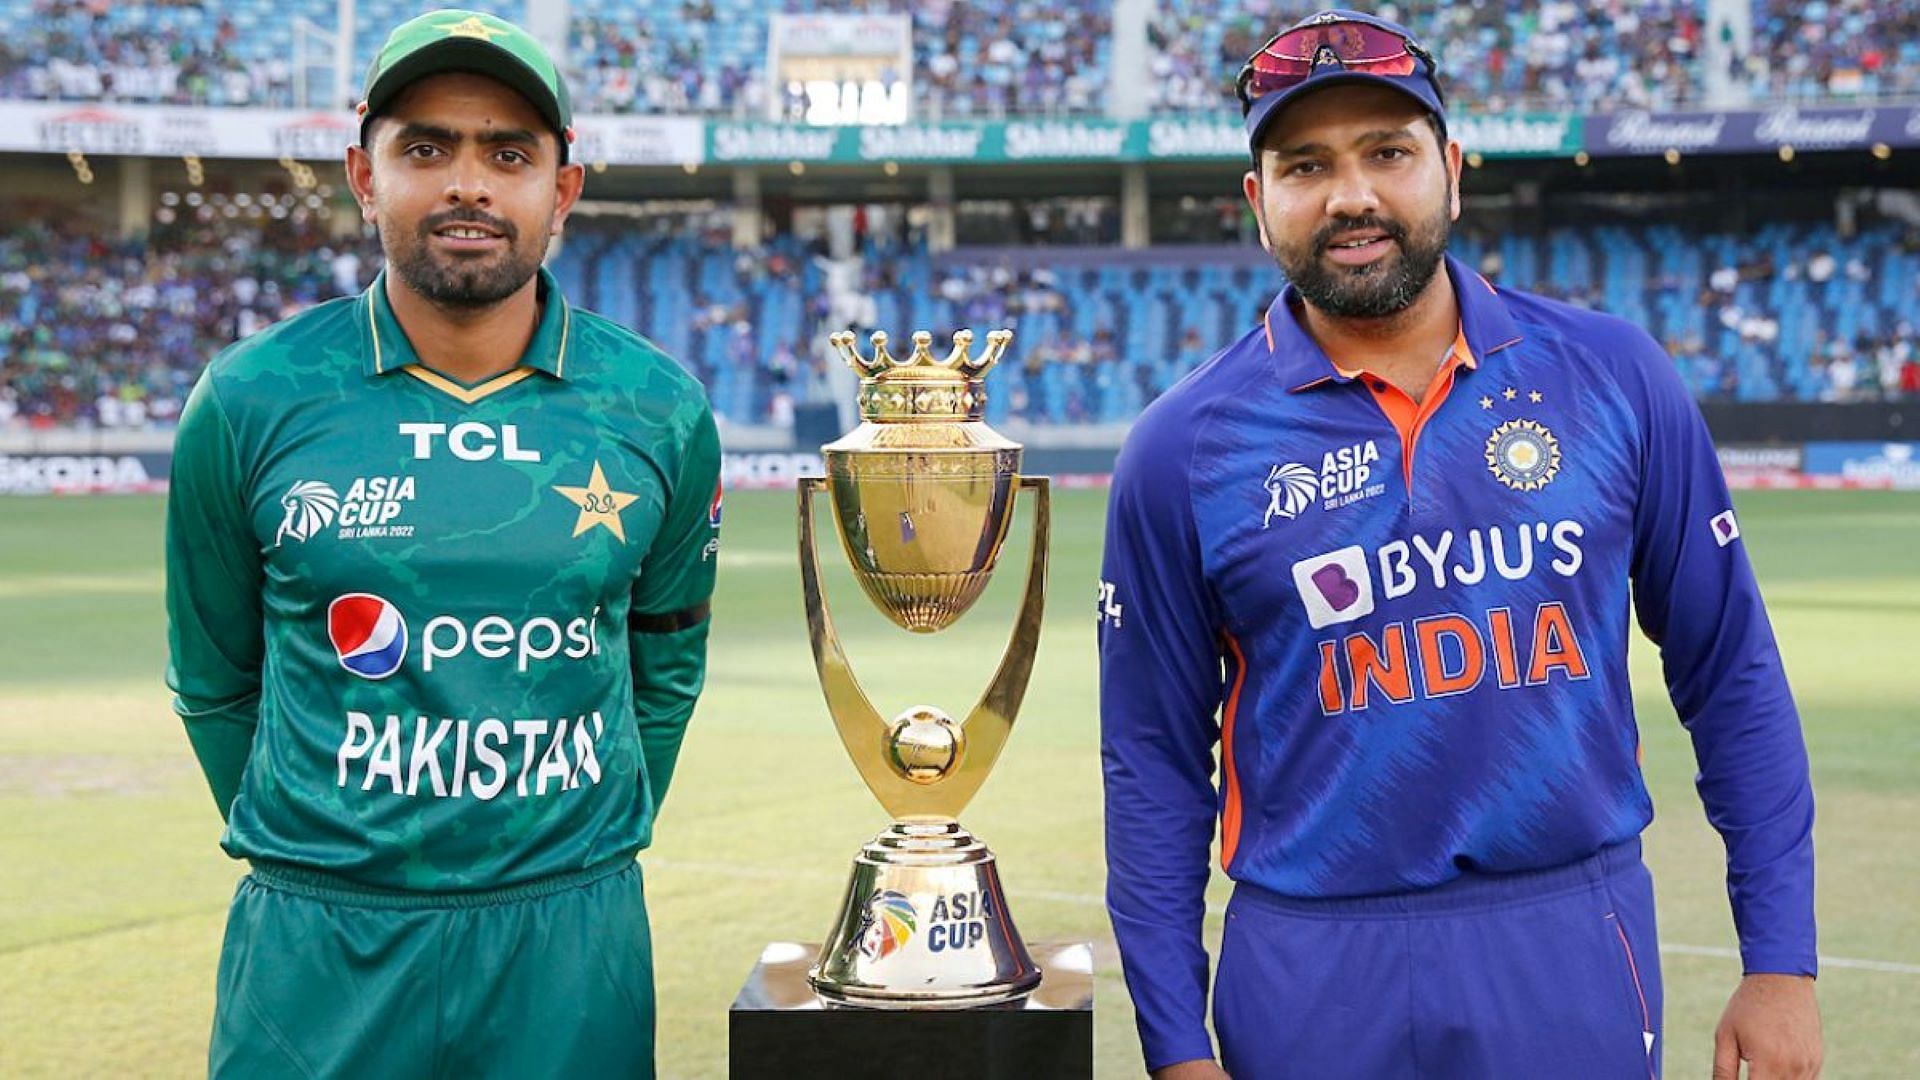 Fans hope to see India take on Pakistan in the Asia Cup later this year.